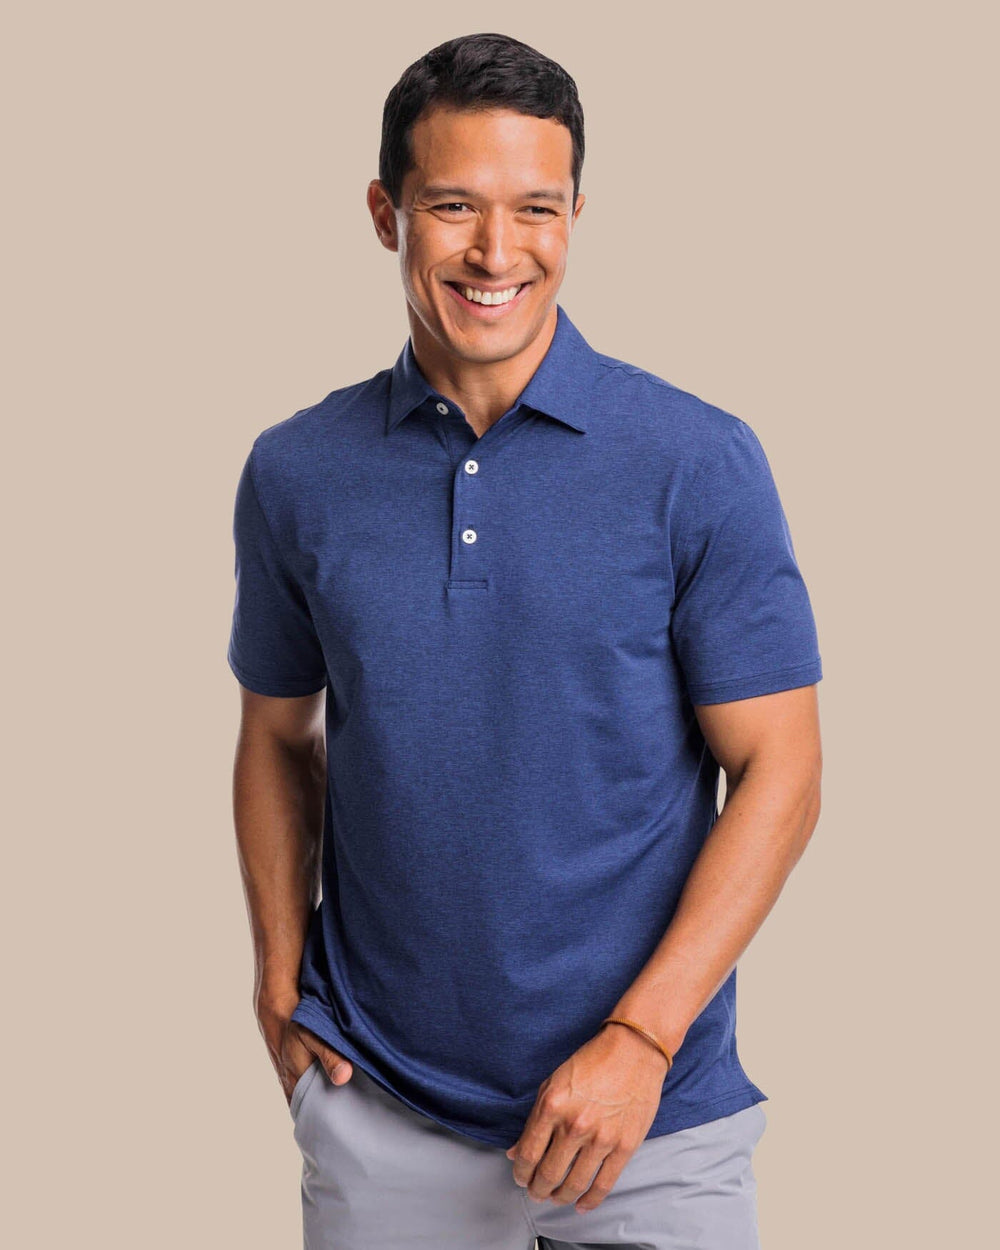 The front view of the brrr°®-eeze Heather Performance Polo Shirt by Southern Tide - Heather Nautical Navy